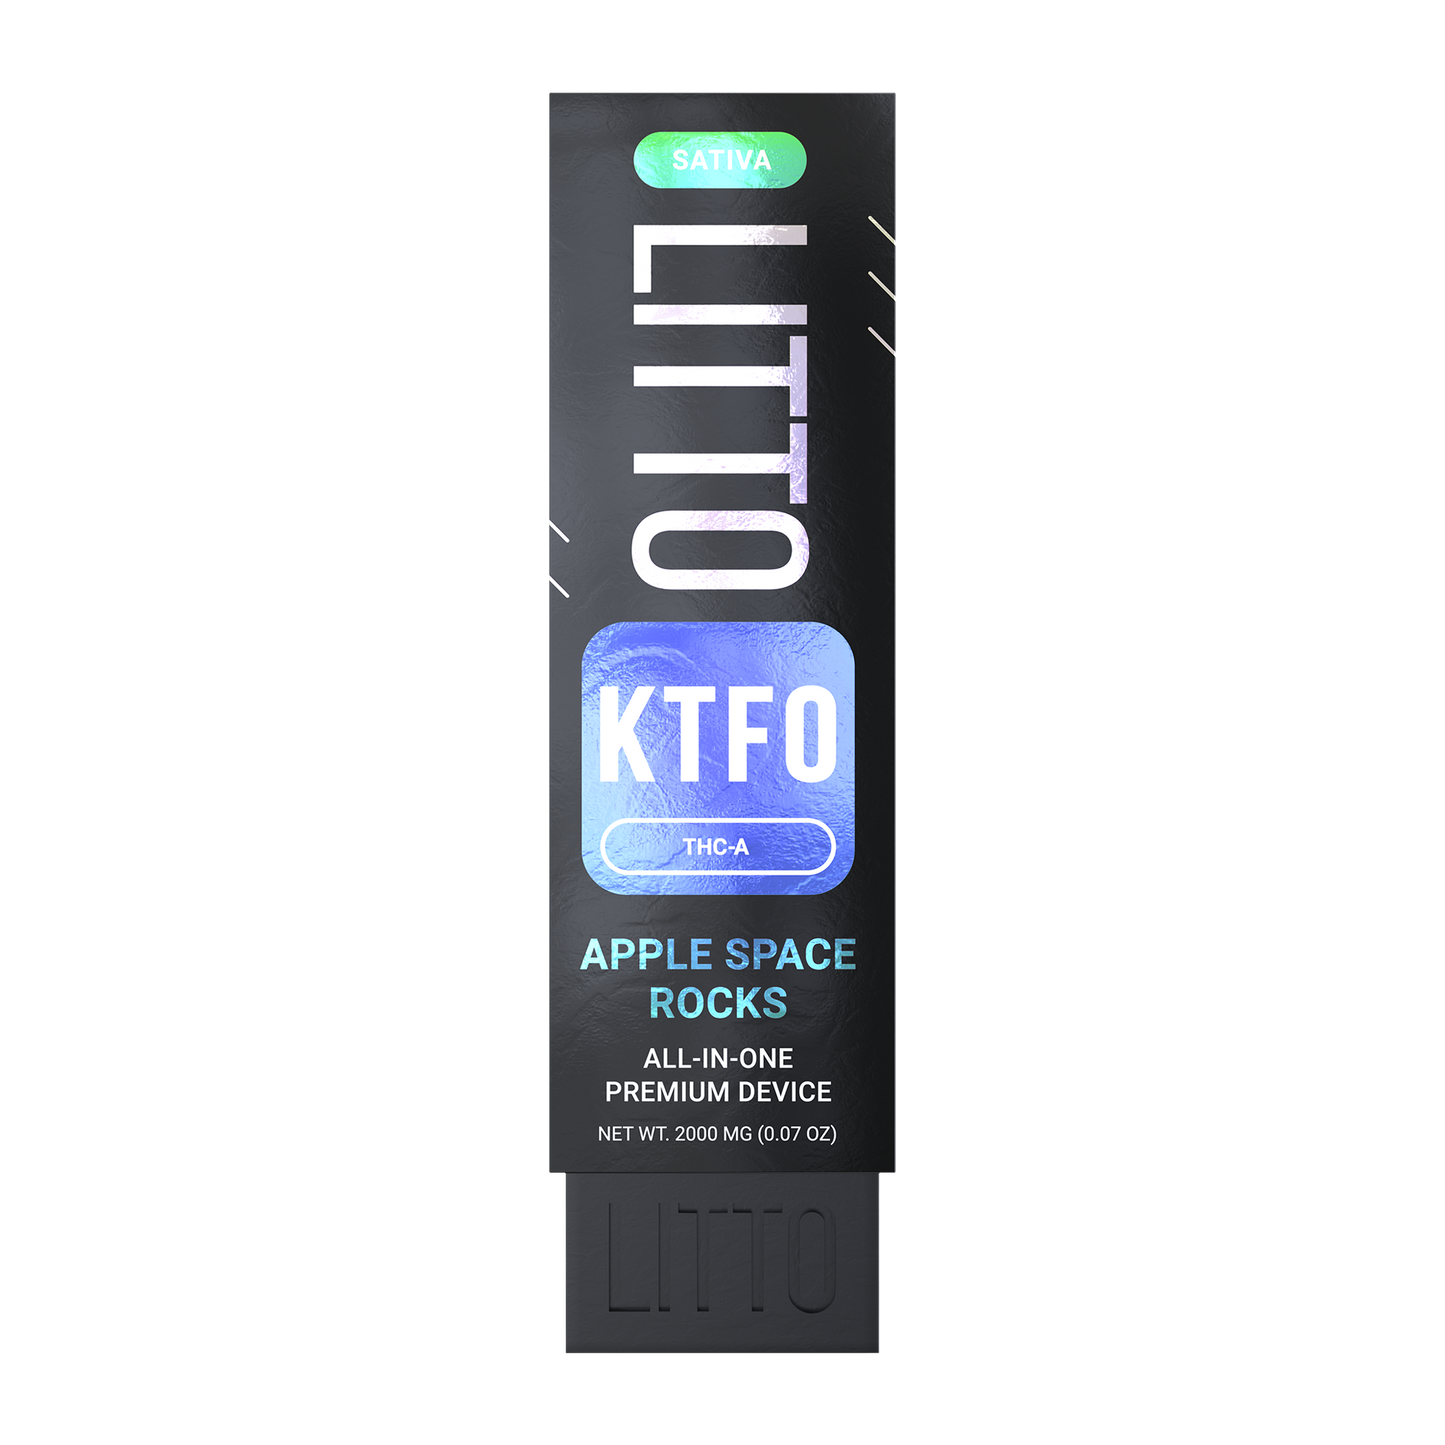 All-in-One Device - KTFO - THCA - Apple Space Rocks - 2G